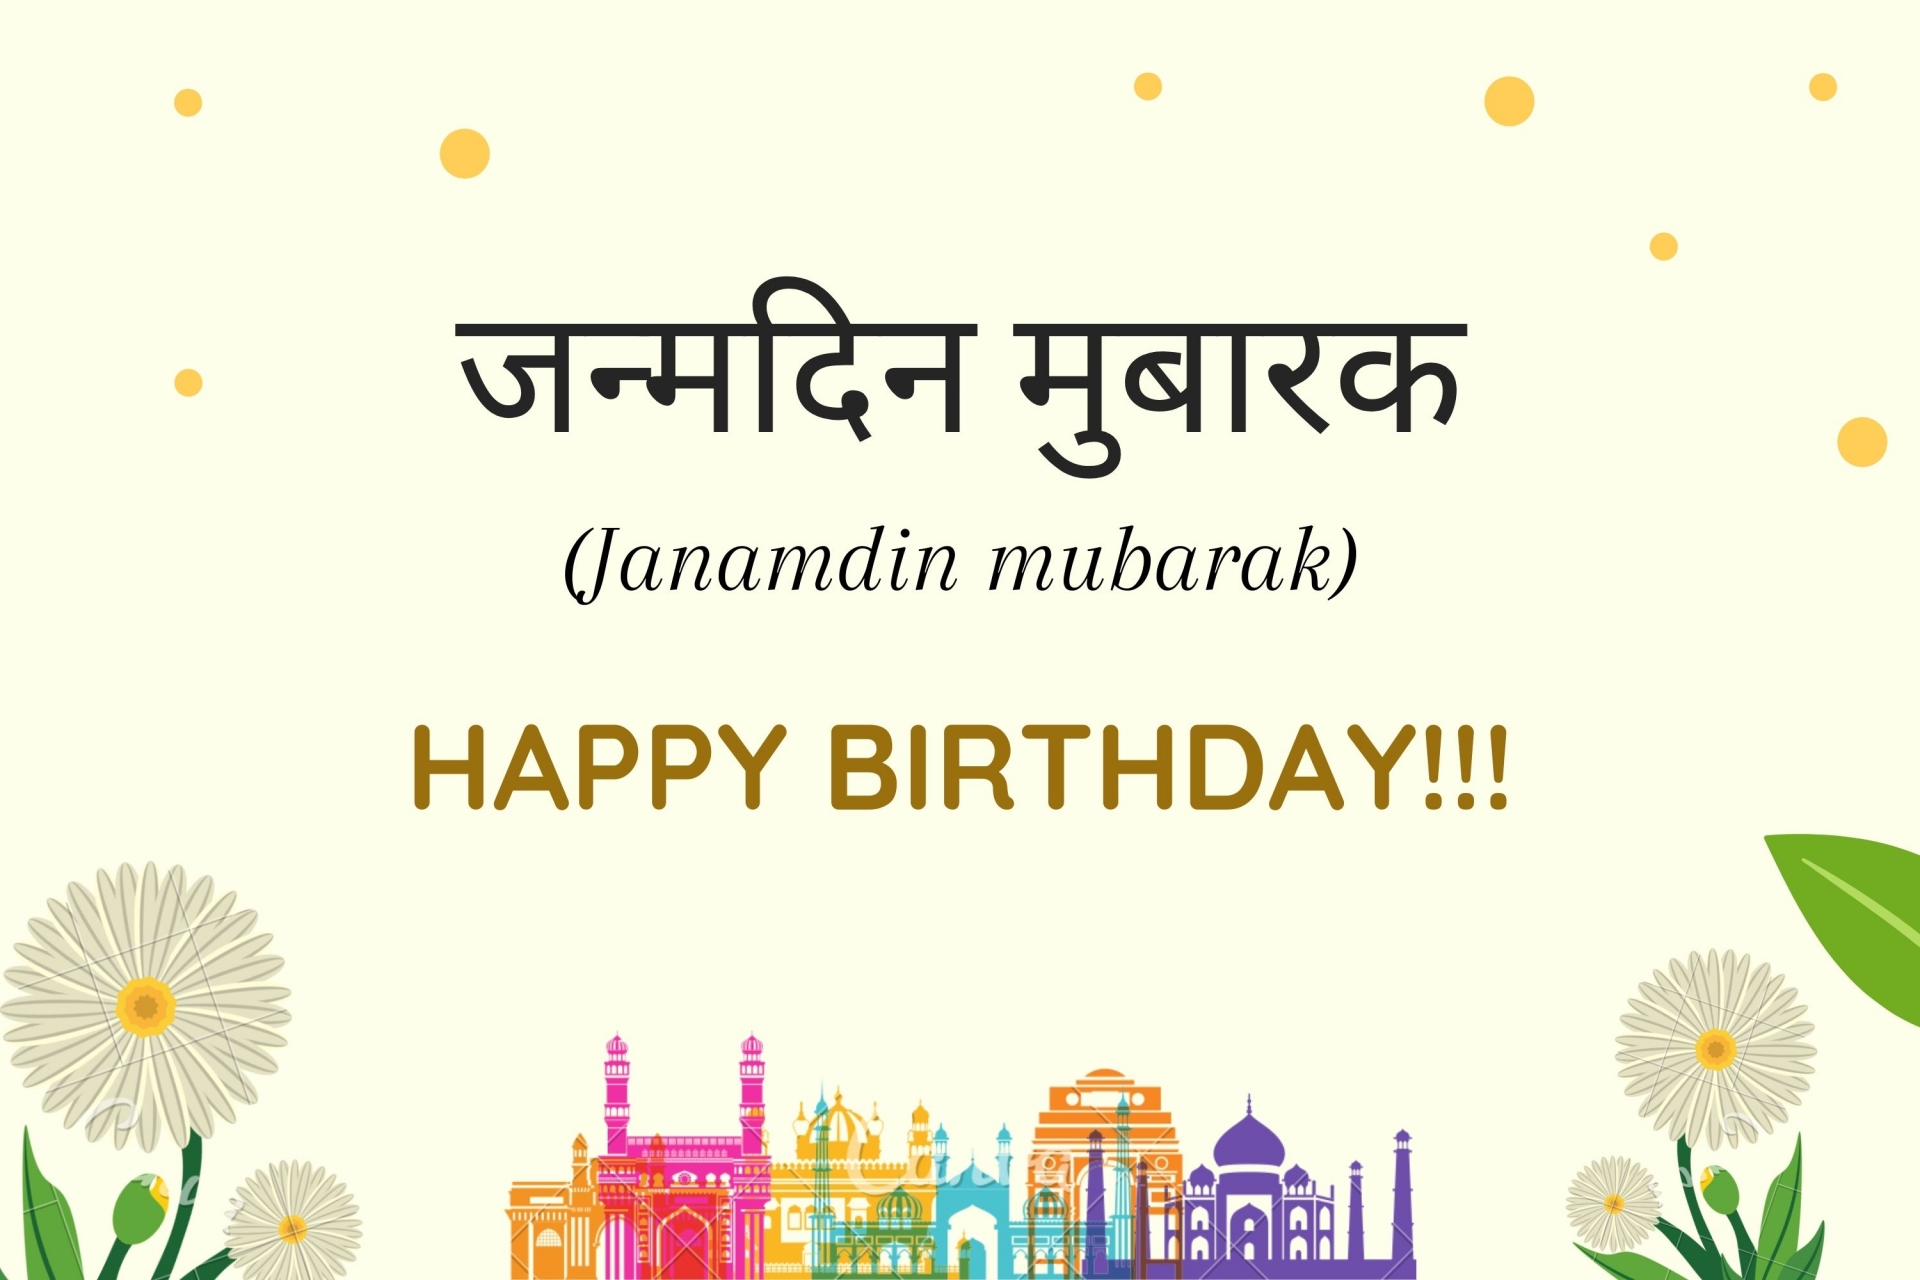 How To  Say Happy Birthday in Hindi - Best Wishes and Quotes